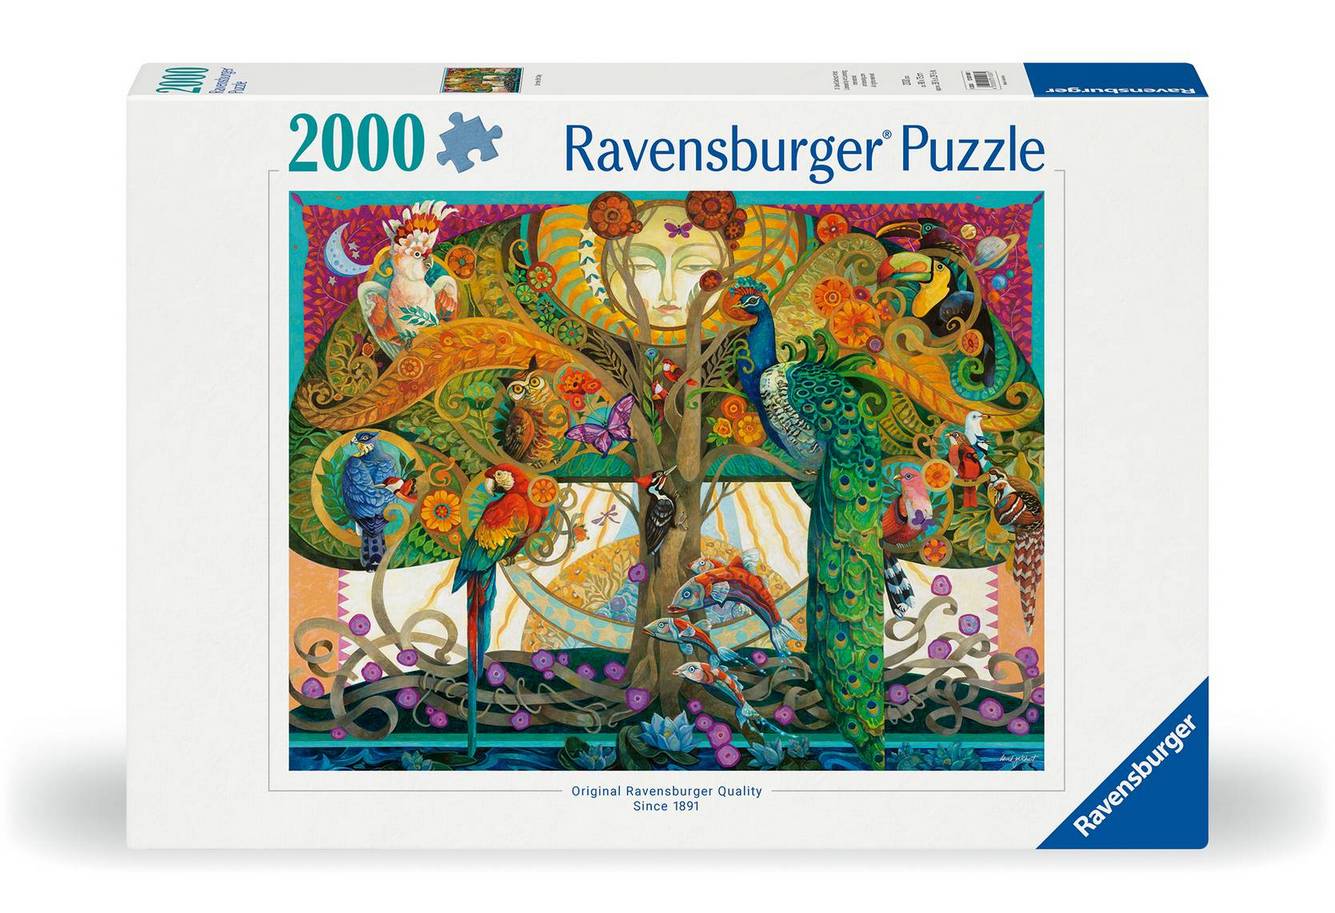 Ravensburger - On the 5th Day - 2000 Piece Jigsaw Puzzle